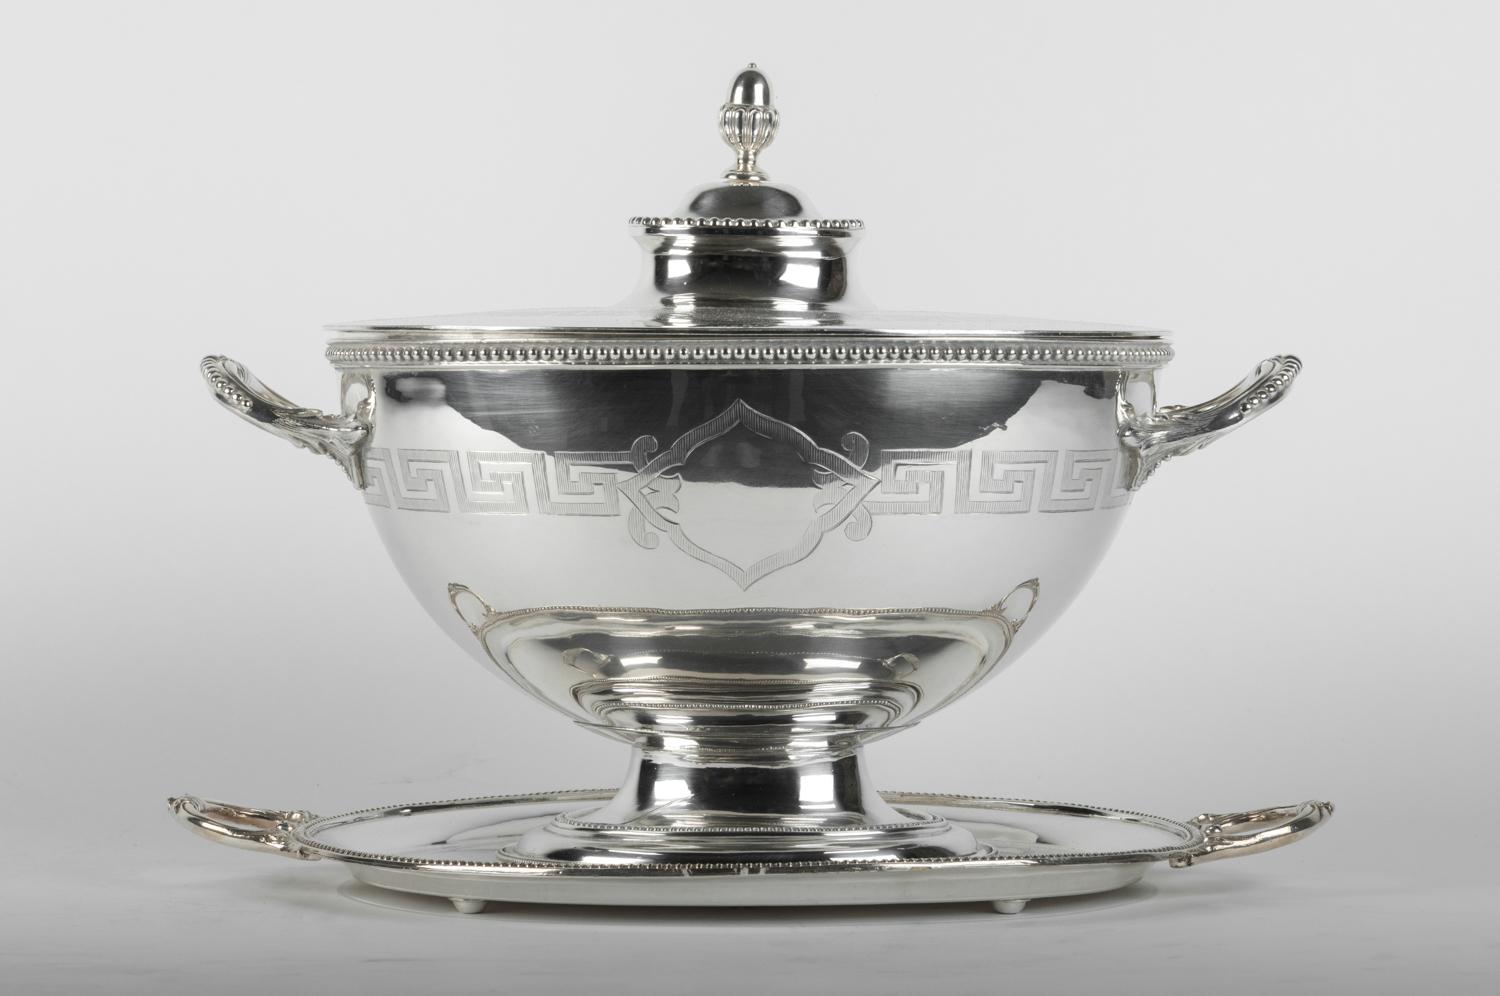 Old English Sheffield silver plated on copper three pieces covered tureen with two sides handle / holding tray. The covered tureen is in great vintage condition, minor wear consistent with age / use. Maker's mark undersigned. The covered tureen